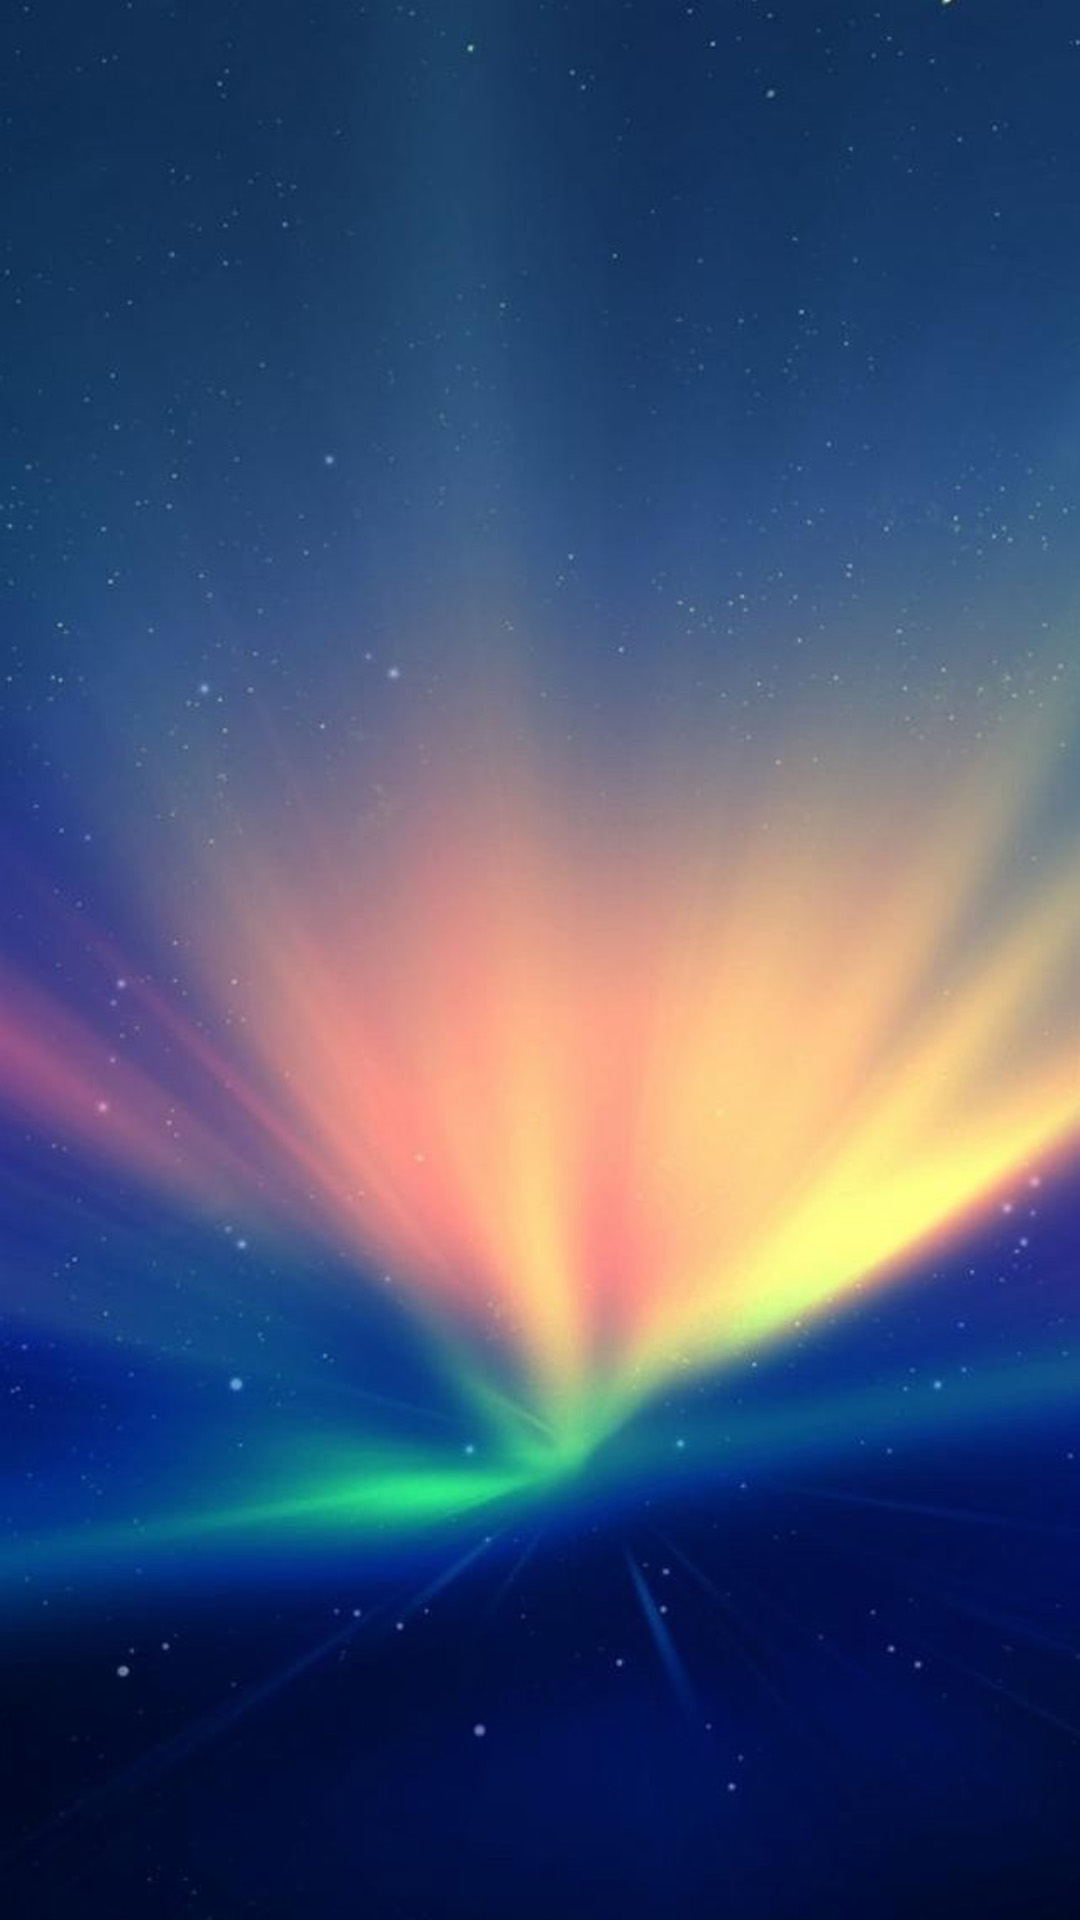 htc one wallpapers